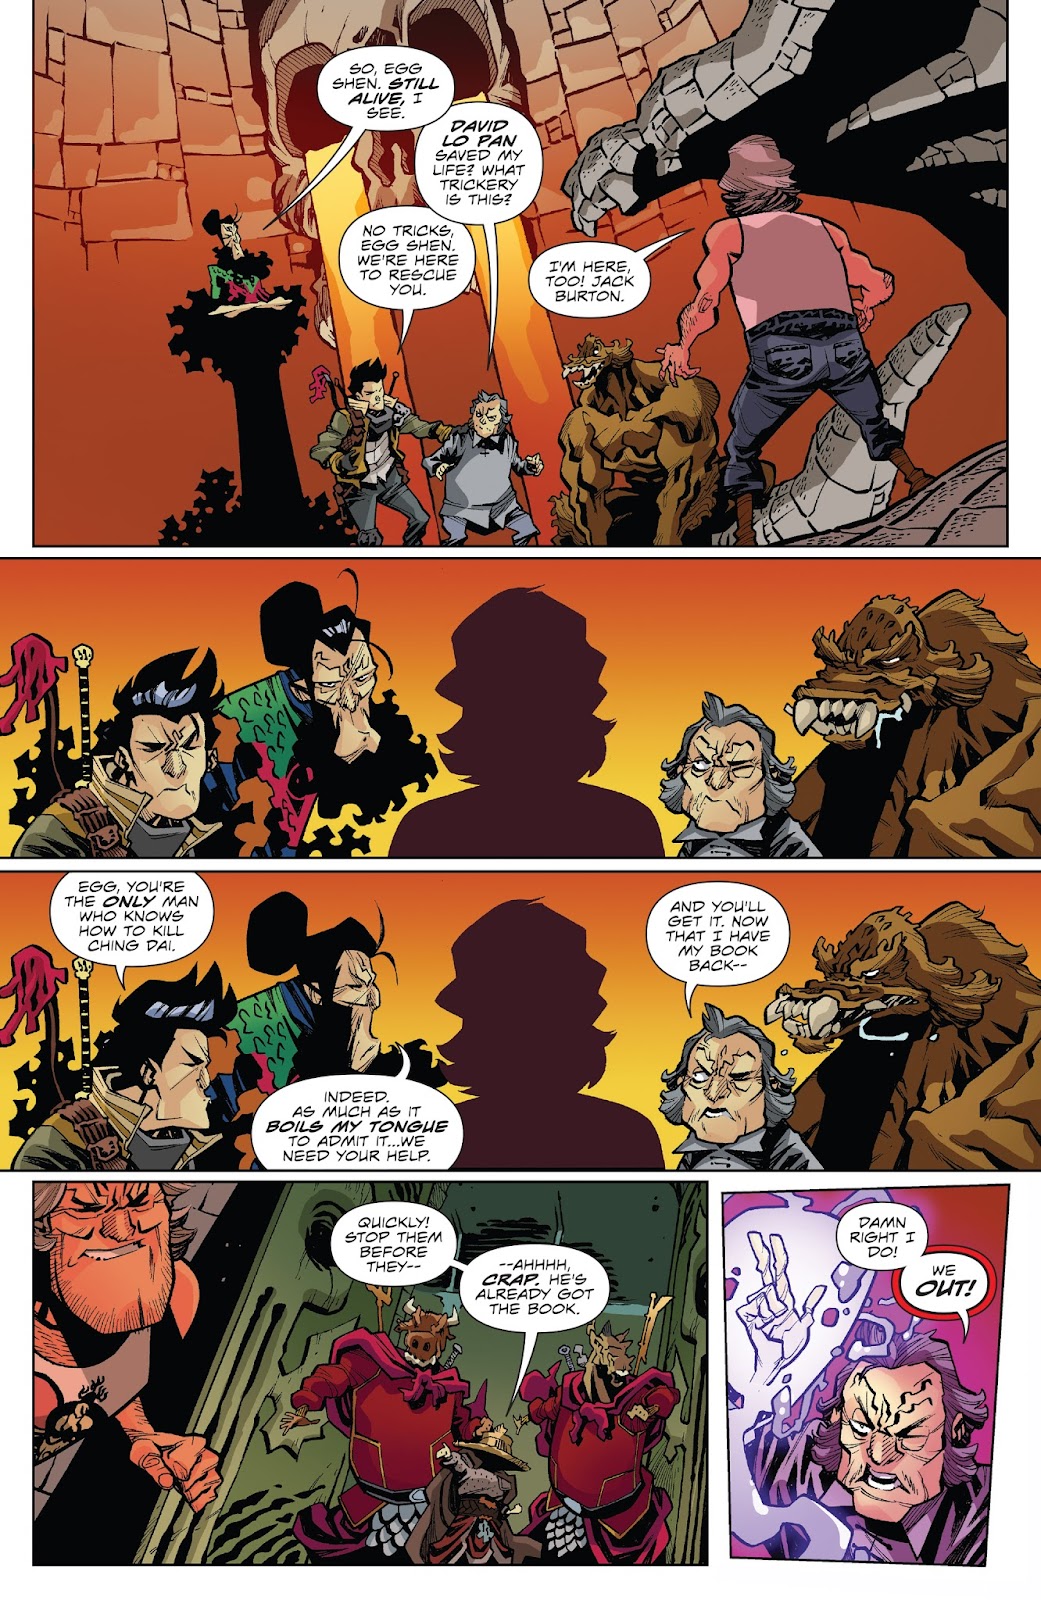 Big Trouble in Little China: Old Man Jack issue 7 - Page 10